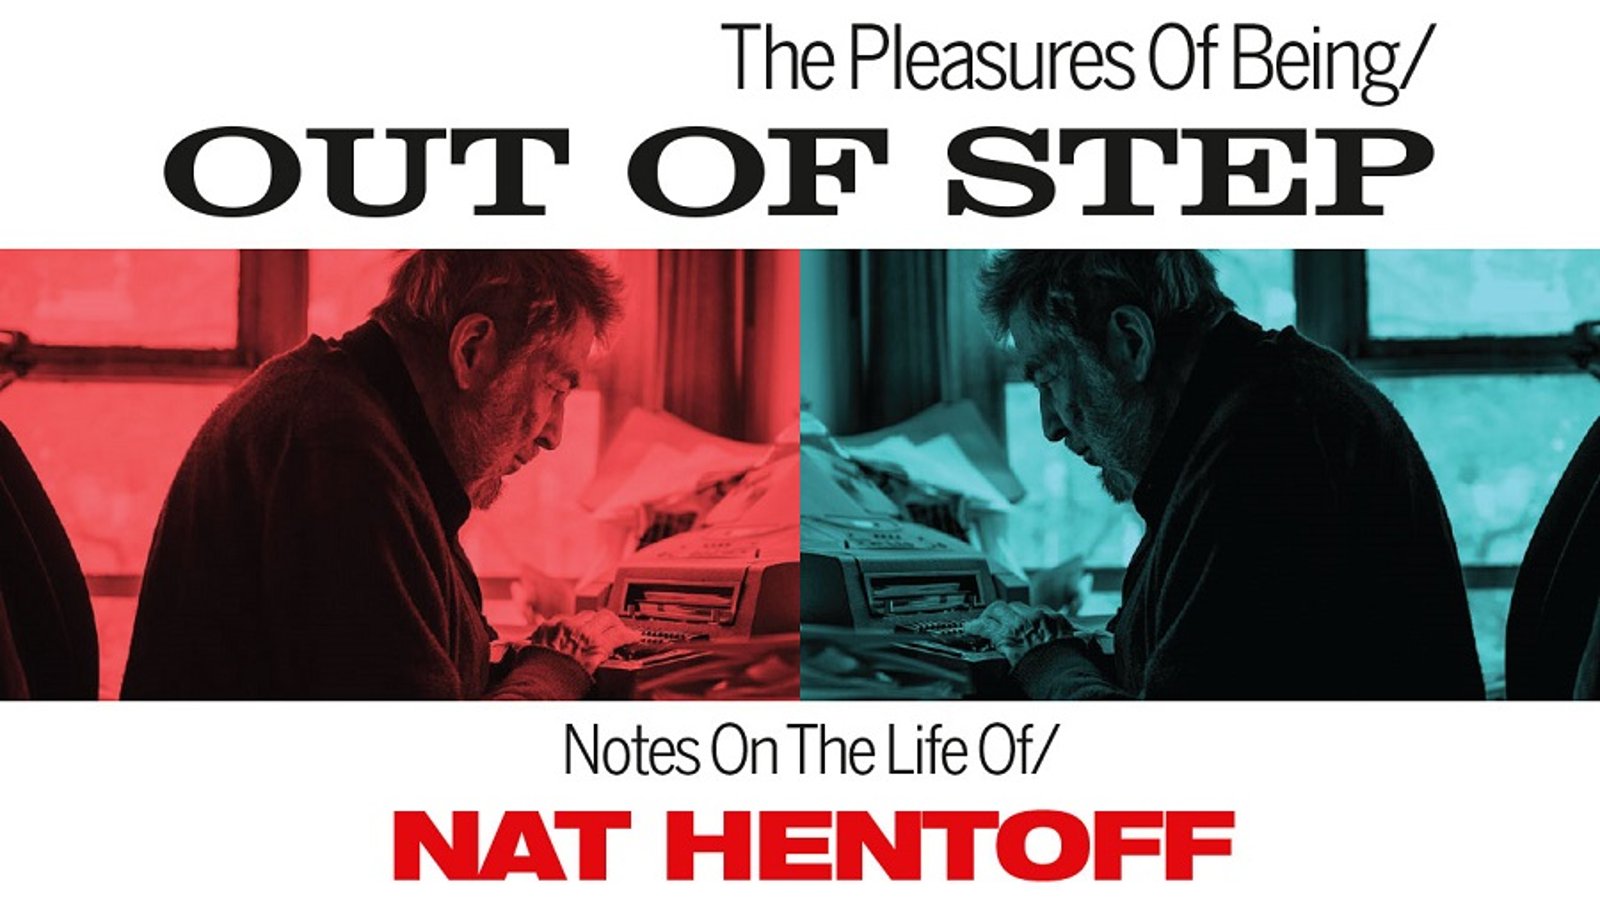 The Pleasures of Being Out of Step - Author Nat Hentoff